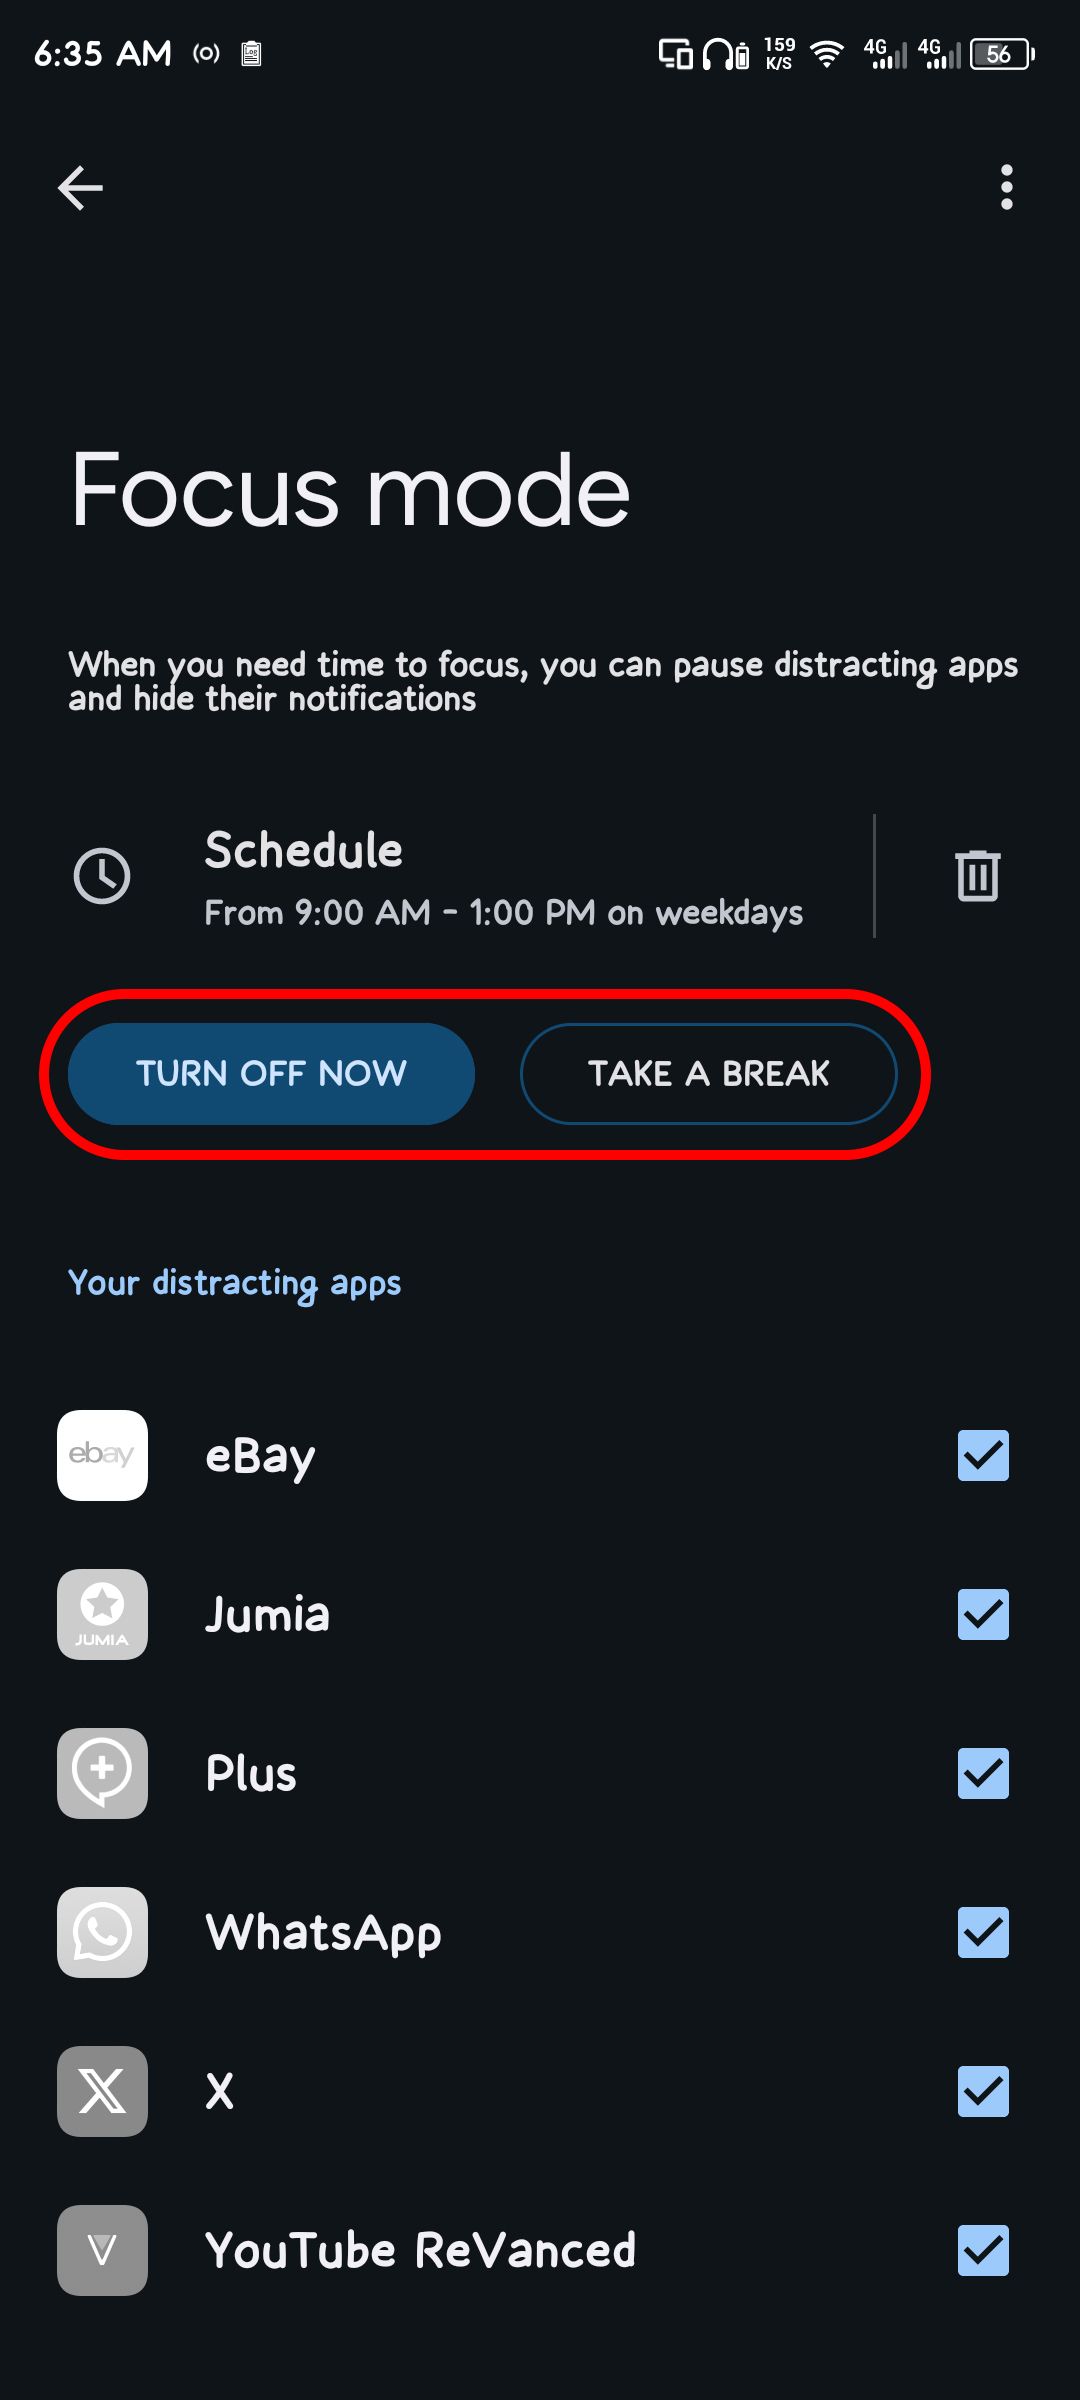 Turning off or pausing Focus mode in the Digital Wellbeing app